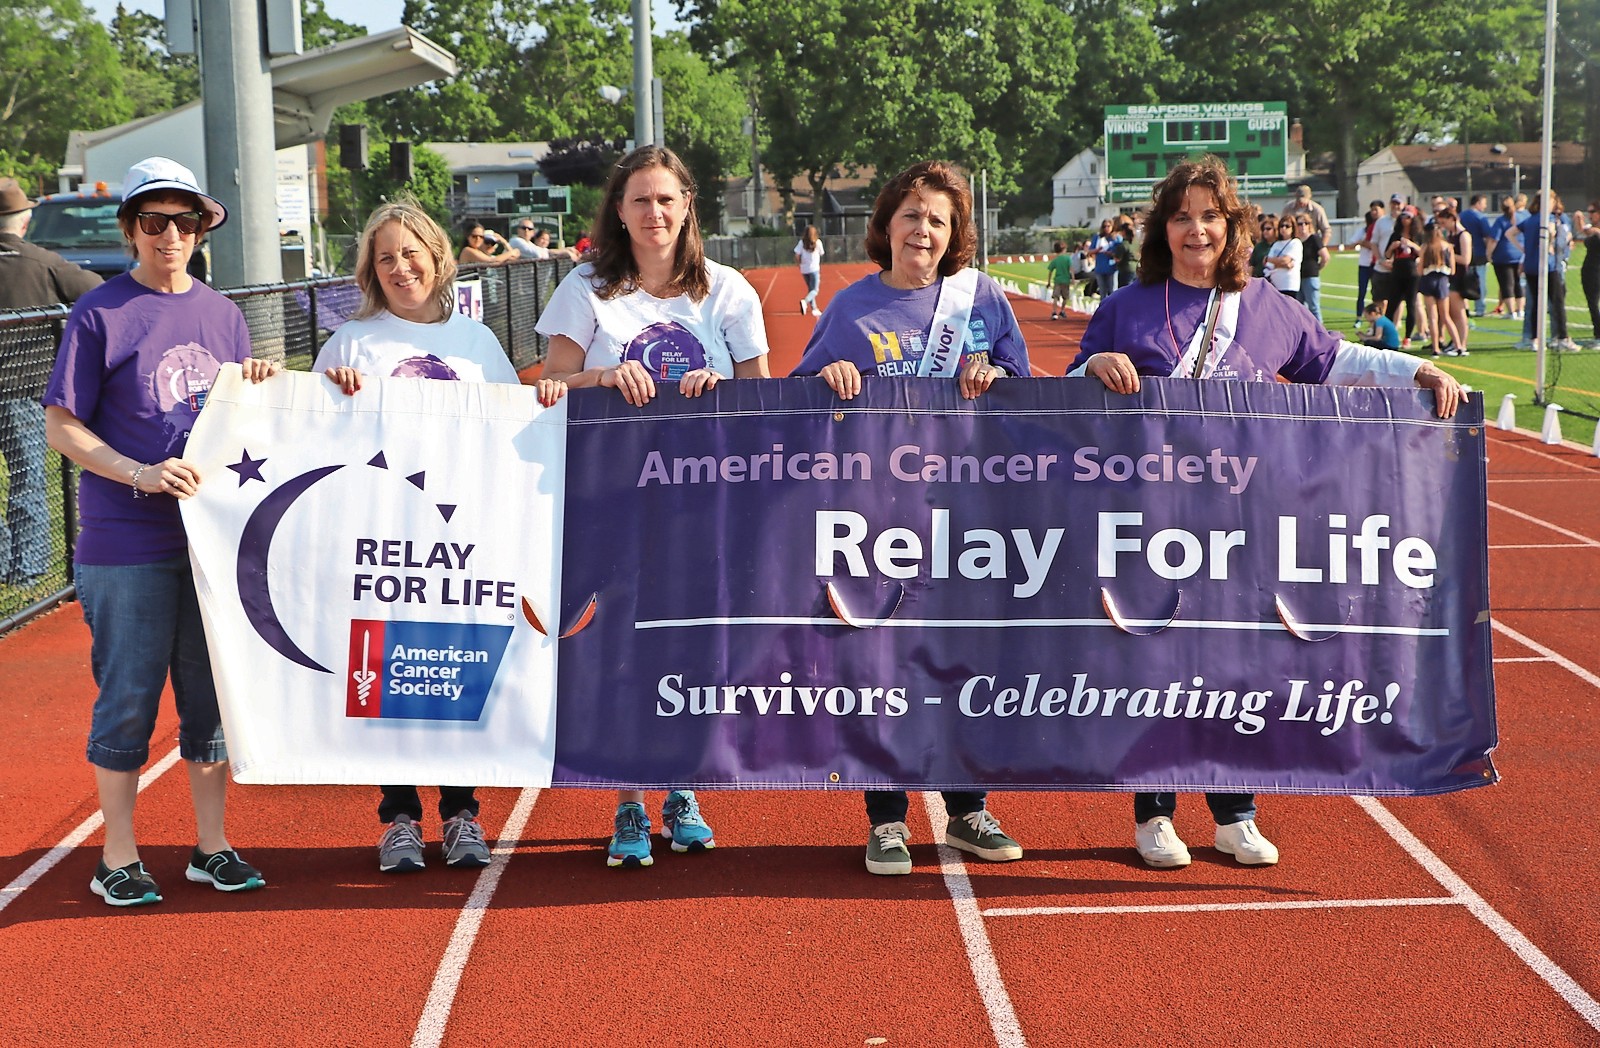 The Survivor Lap began at Seaford Relay for Life around the high school track with, from left, Carol Osa, a survivor for five years; Fern Akrish, the child of a survivor; Terry Gough, the survivor speaker; Lynn Biggiani (two years); and Carol Ross (one year).